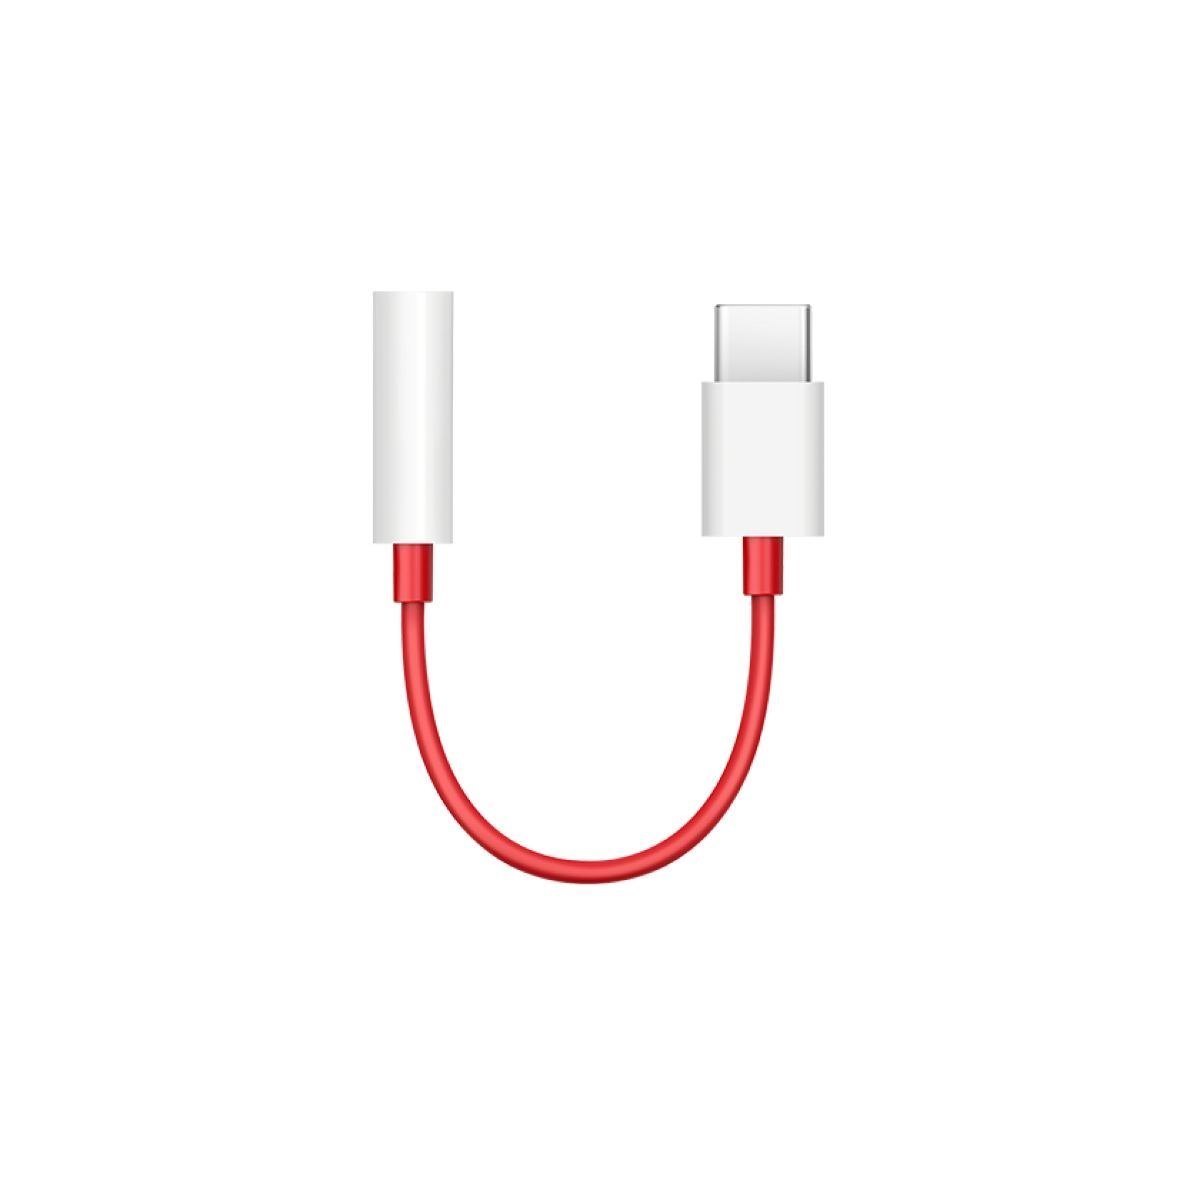 OnePlus TC01W Mobile Phone Cable Red 0.09 M Usb C 3.5MM (OnePlus Headphone Adapter Usb-C To 3.5 MM - Red)